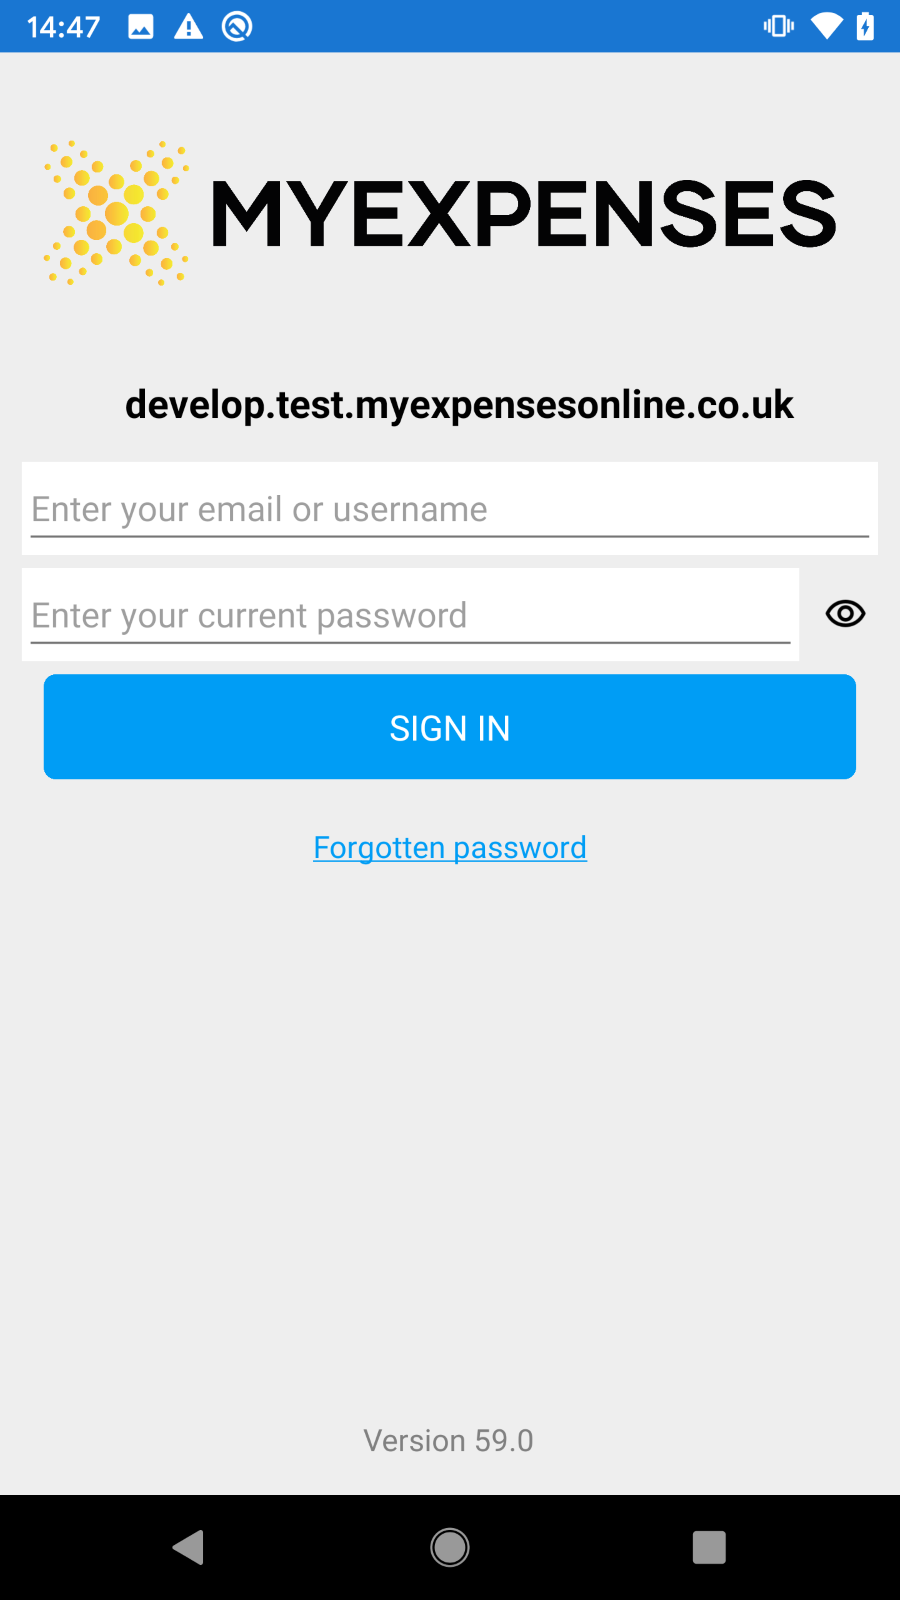 A screenshot of a login form

Description automatically generated with medium confidence